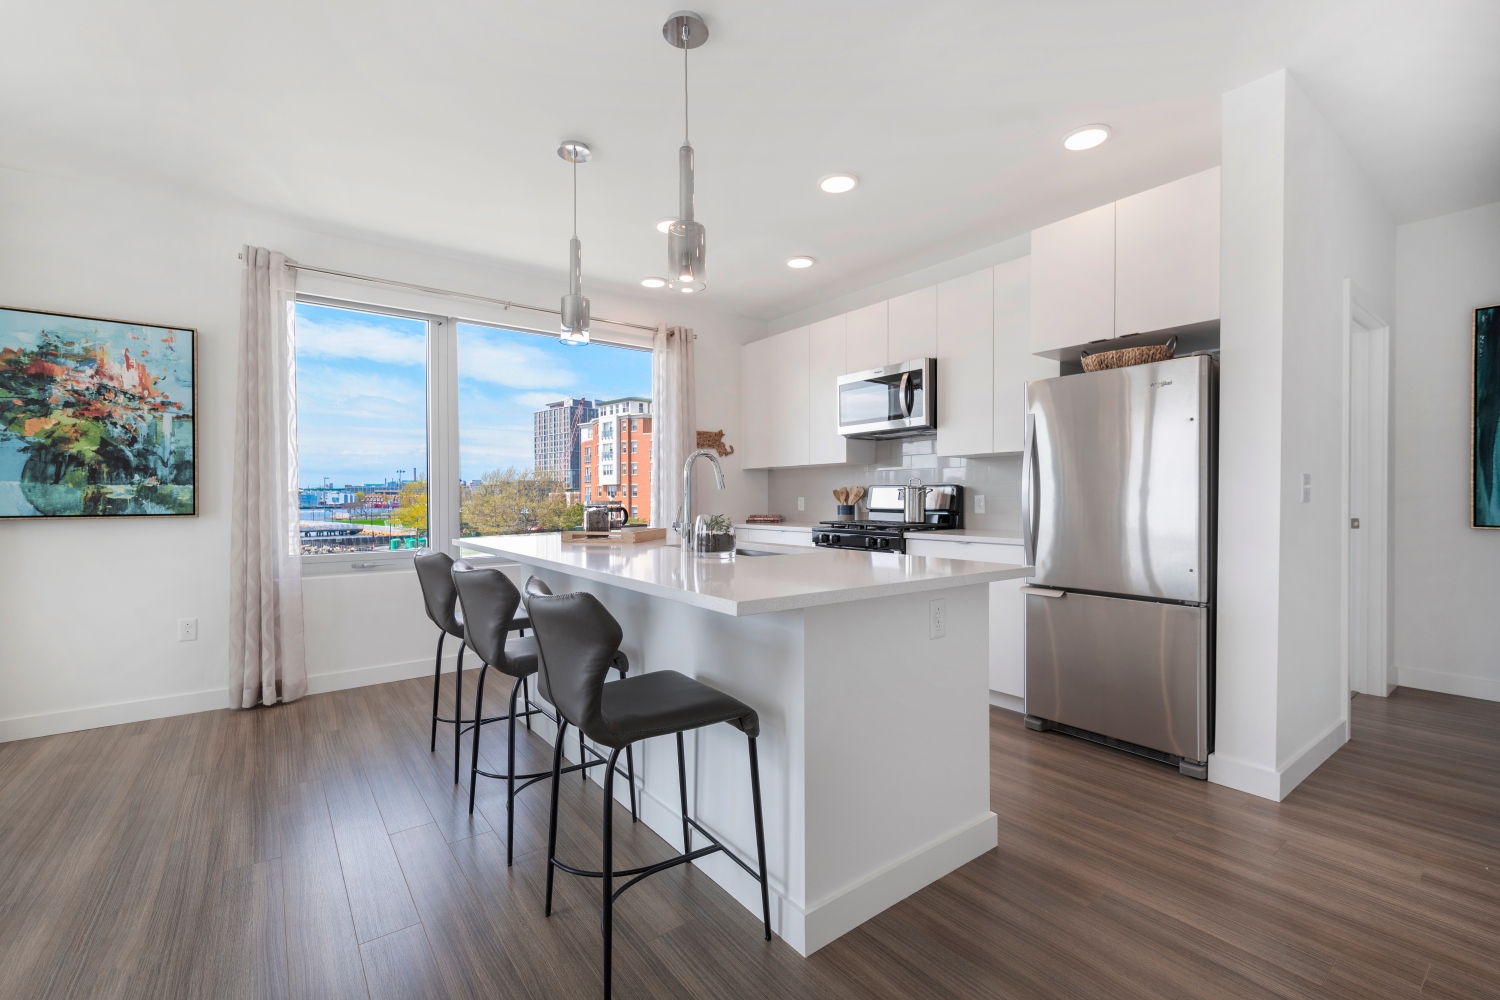 Clippership Apartments on the Wharf : Kitchen